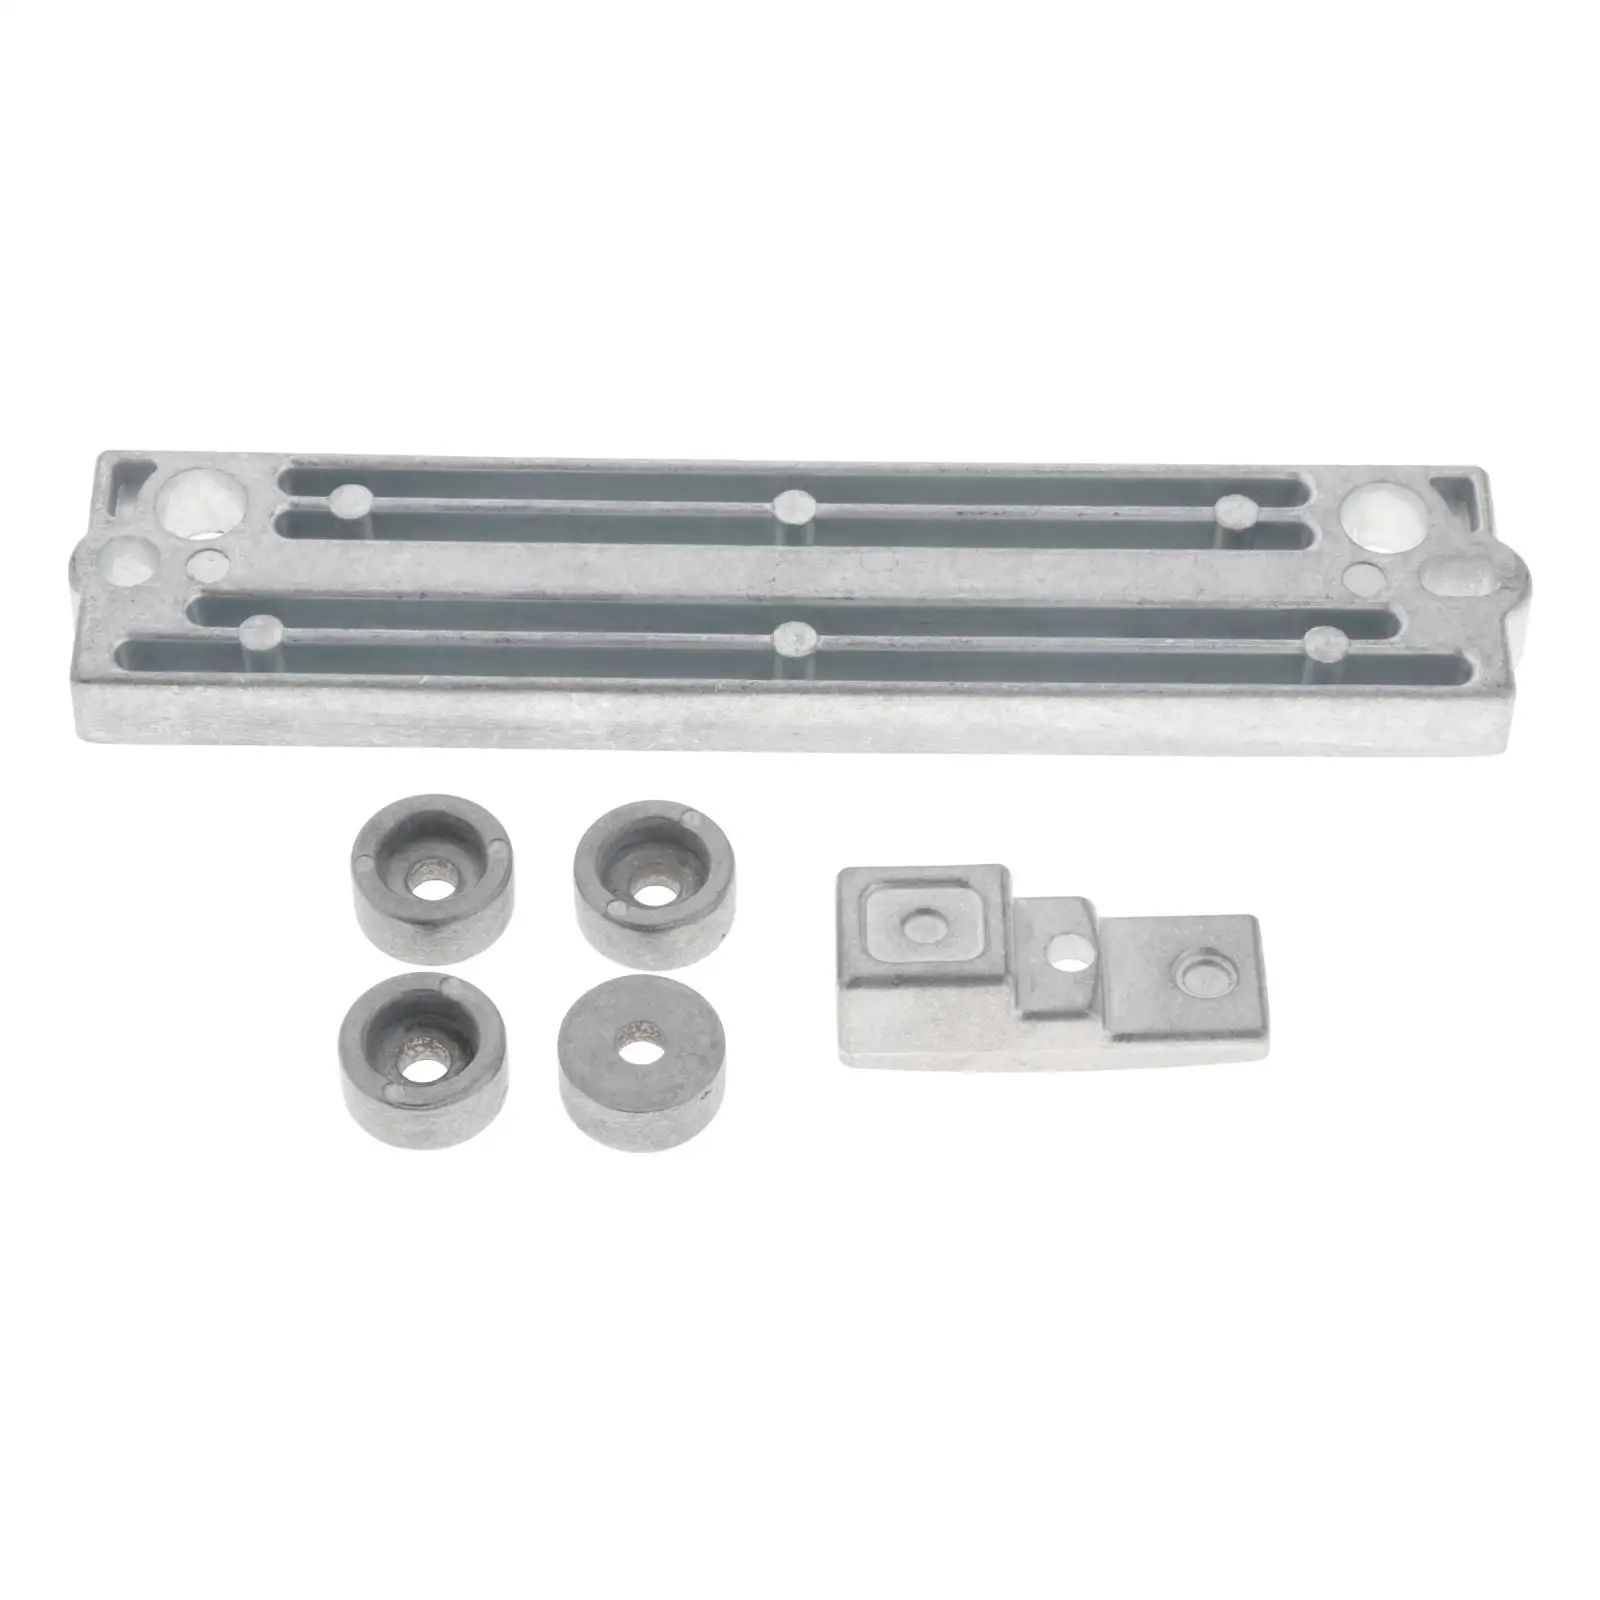 Anode Kit Replaces 55321-90J01 55321-87J00 Accessories 1 Set 55320-94900 for